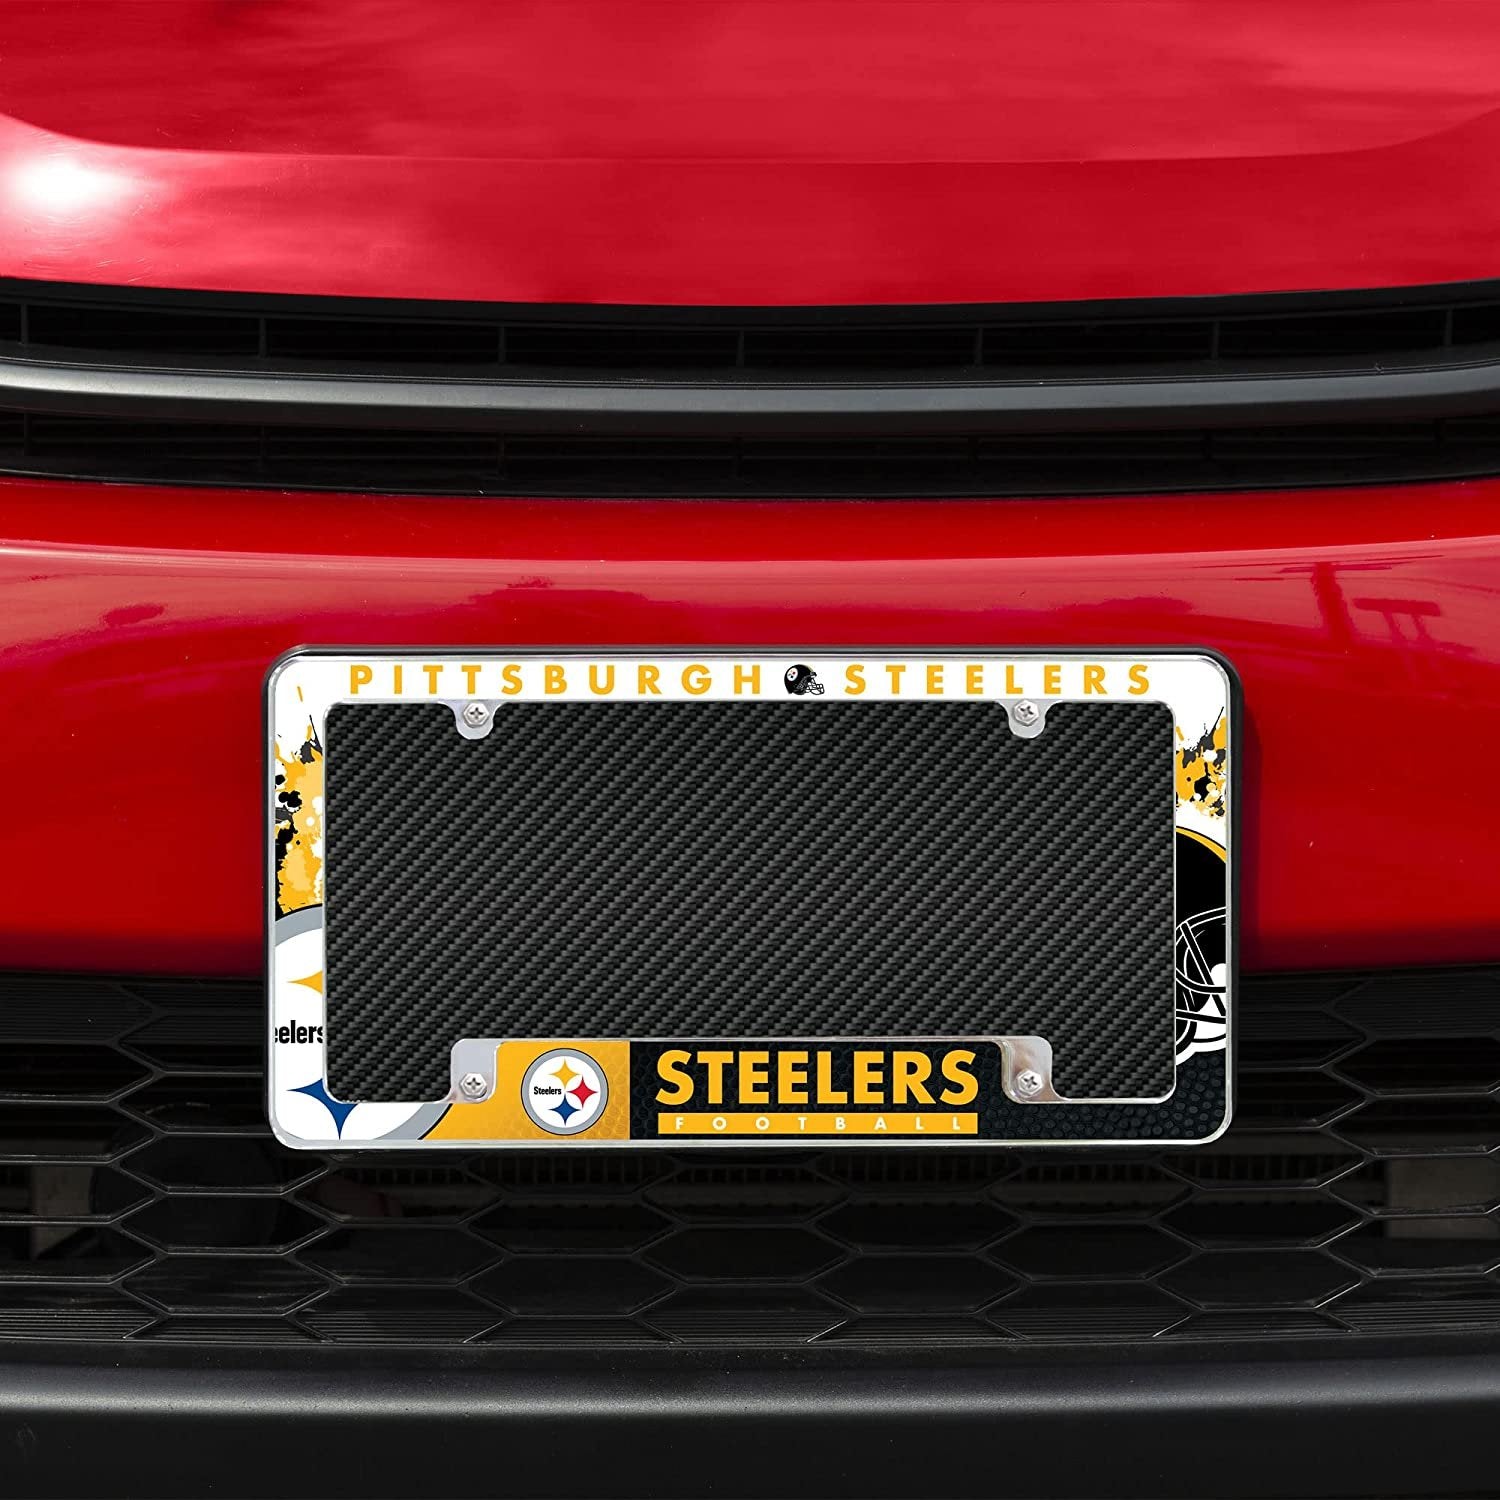 Pittsburgh Steelers Metal License Plate Frame Chrome Tag Cover All Over Design 12x6 Inch